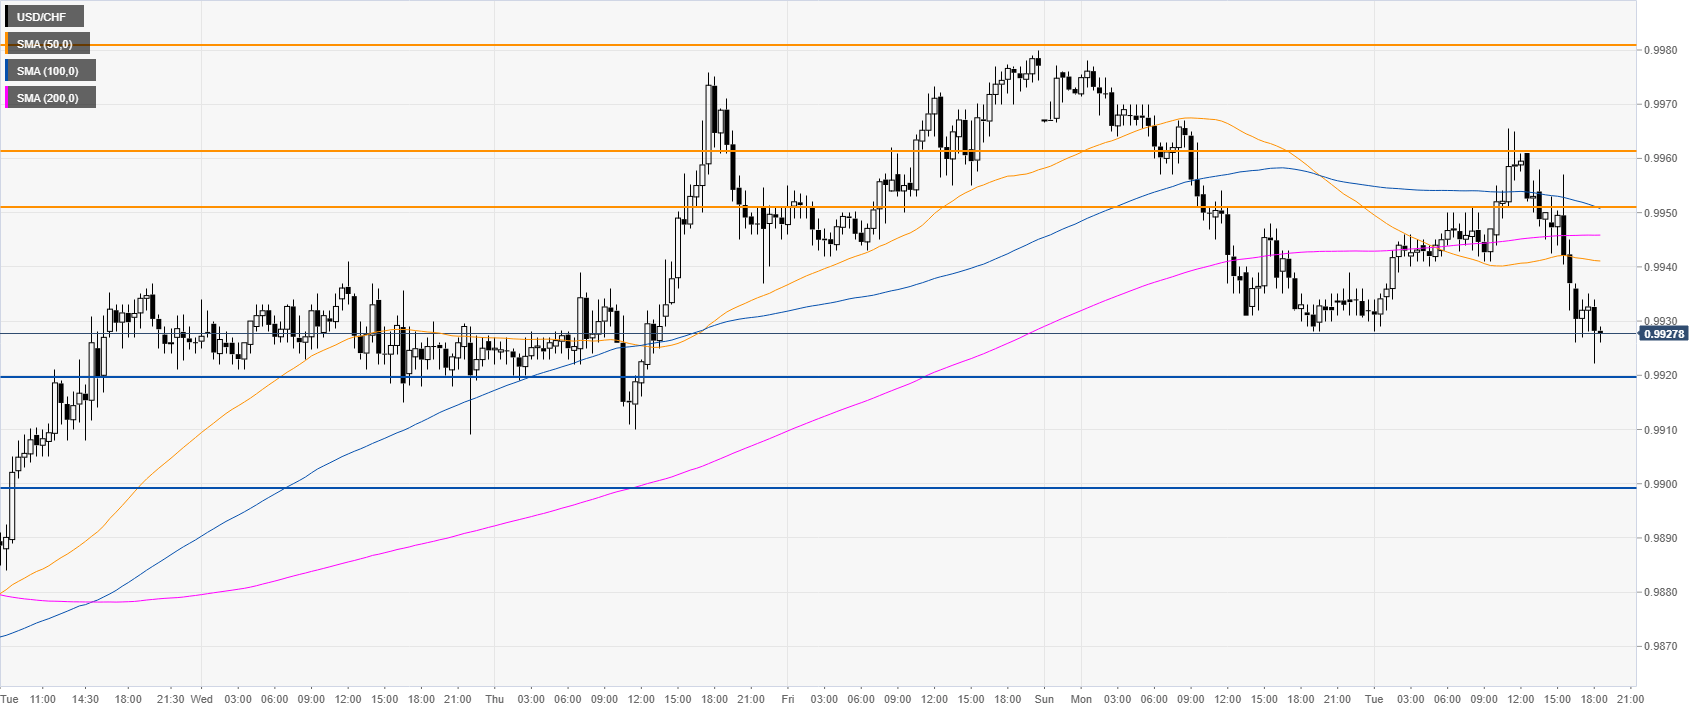 USD/CHF technical analysis: Greenback loses steam against Swissy, trades near 0.9930 level